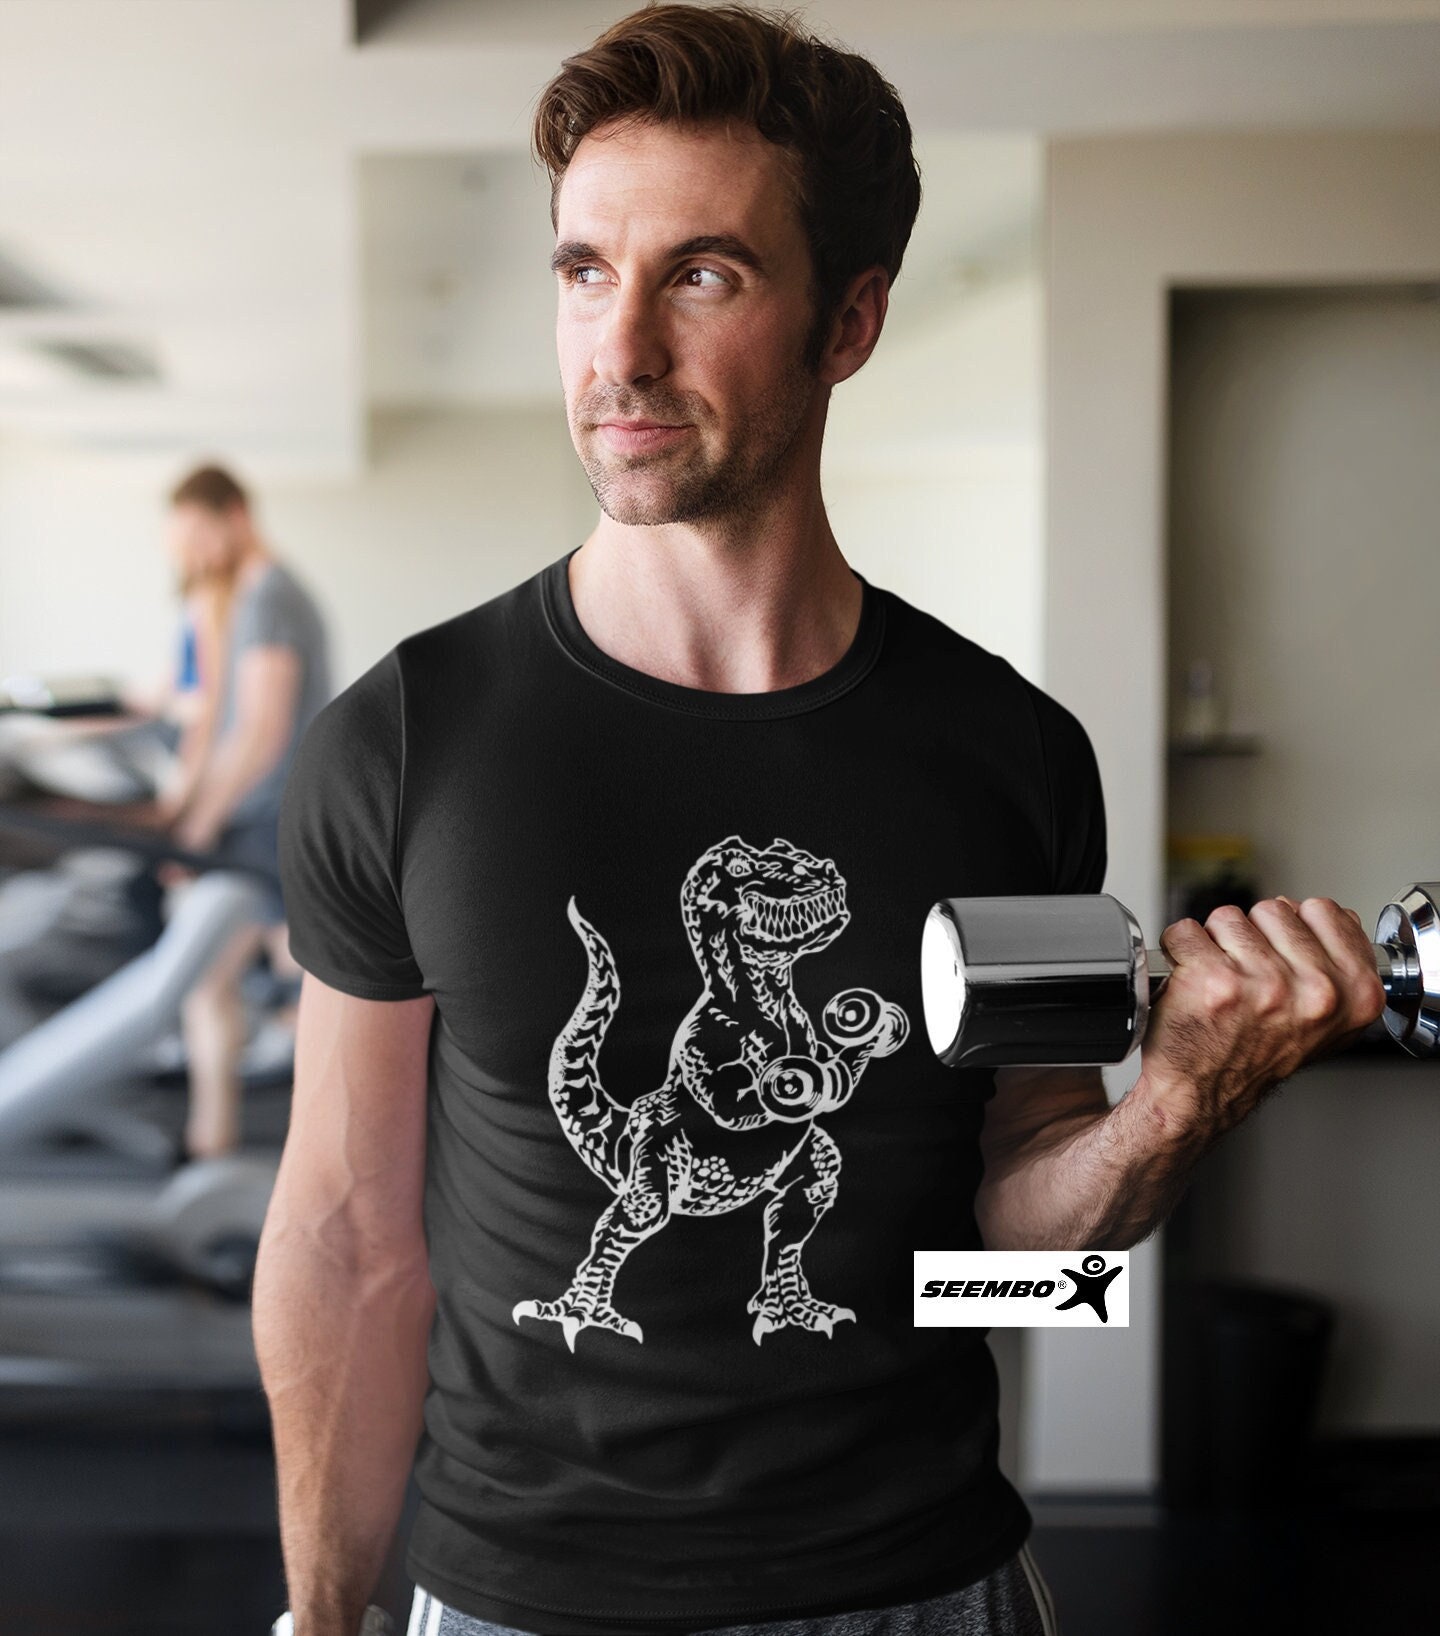 Men's Funny Gym Rat T Shirt workout fitness bodybuilding muscle biceps  weight